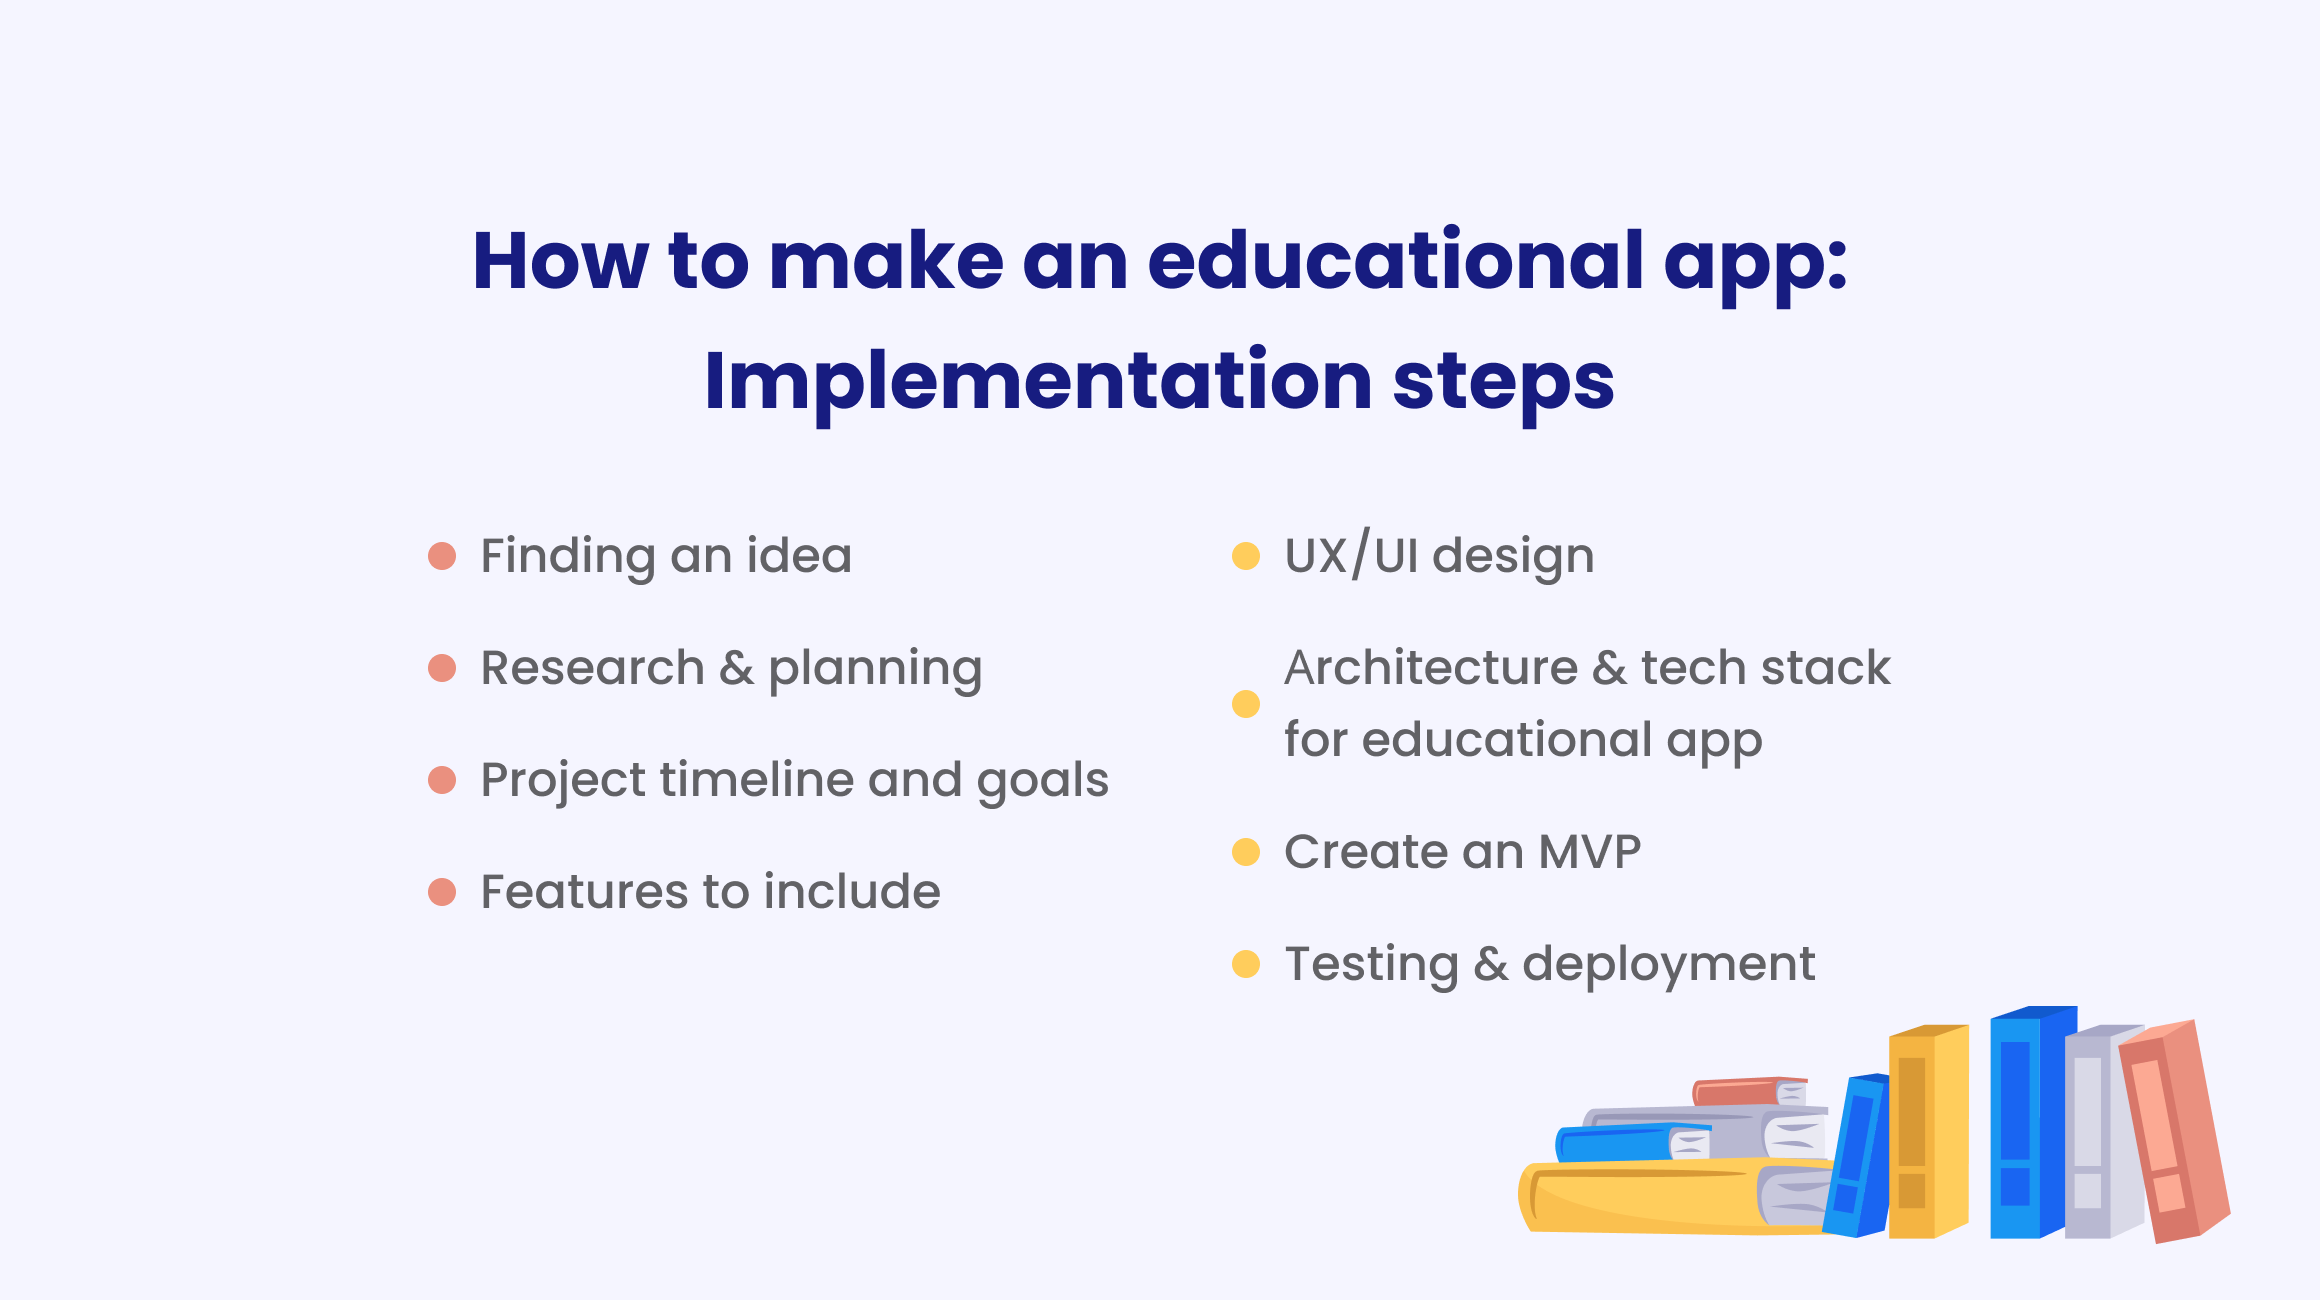 Steps to develop an educational app